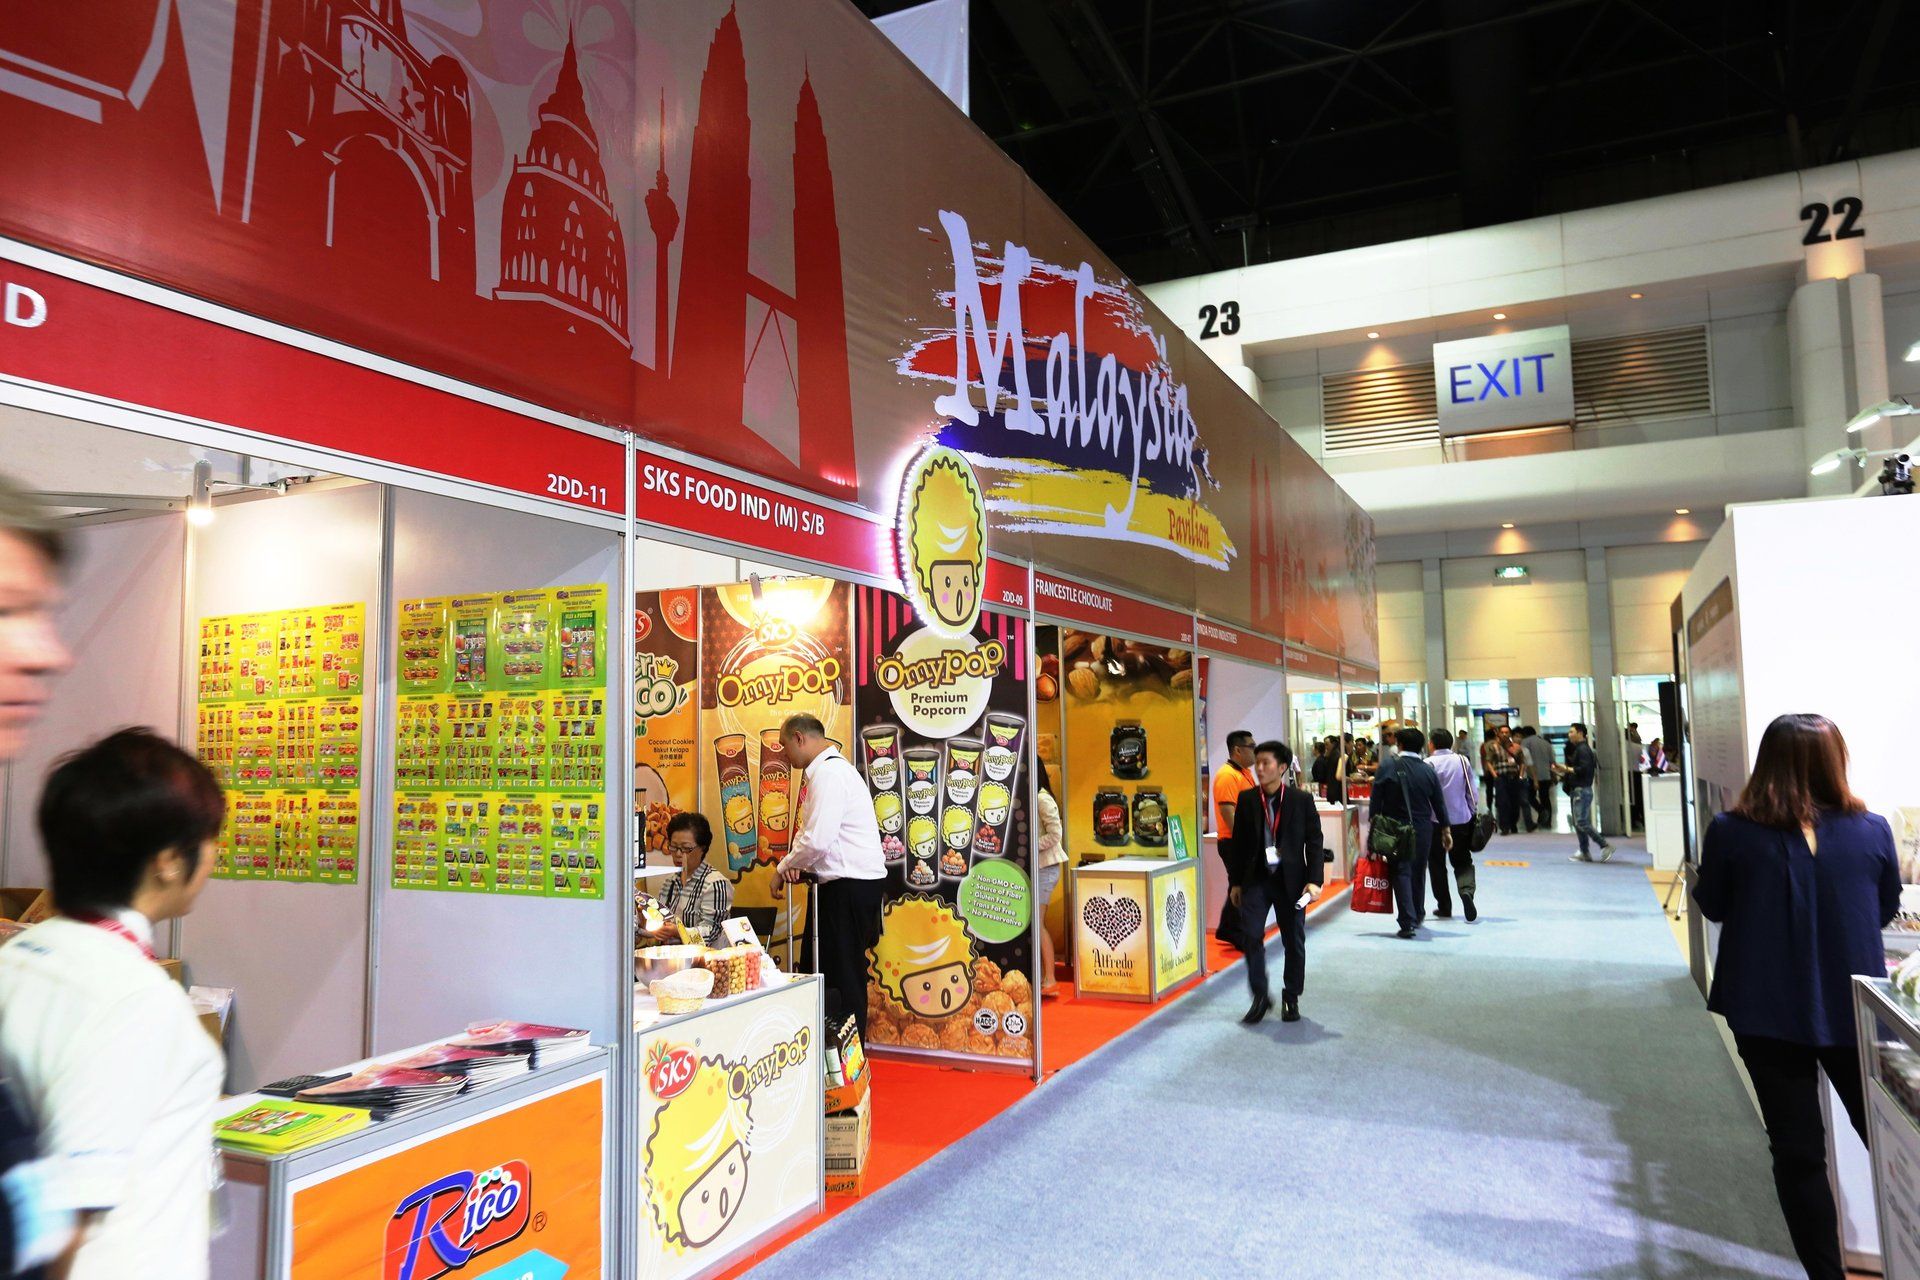 Malaysia Pavilion @ Thaifex 2015. Booth designed and built by Essential Global Fairs.